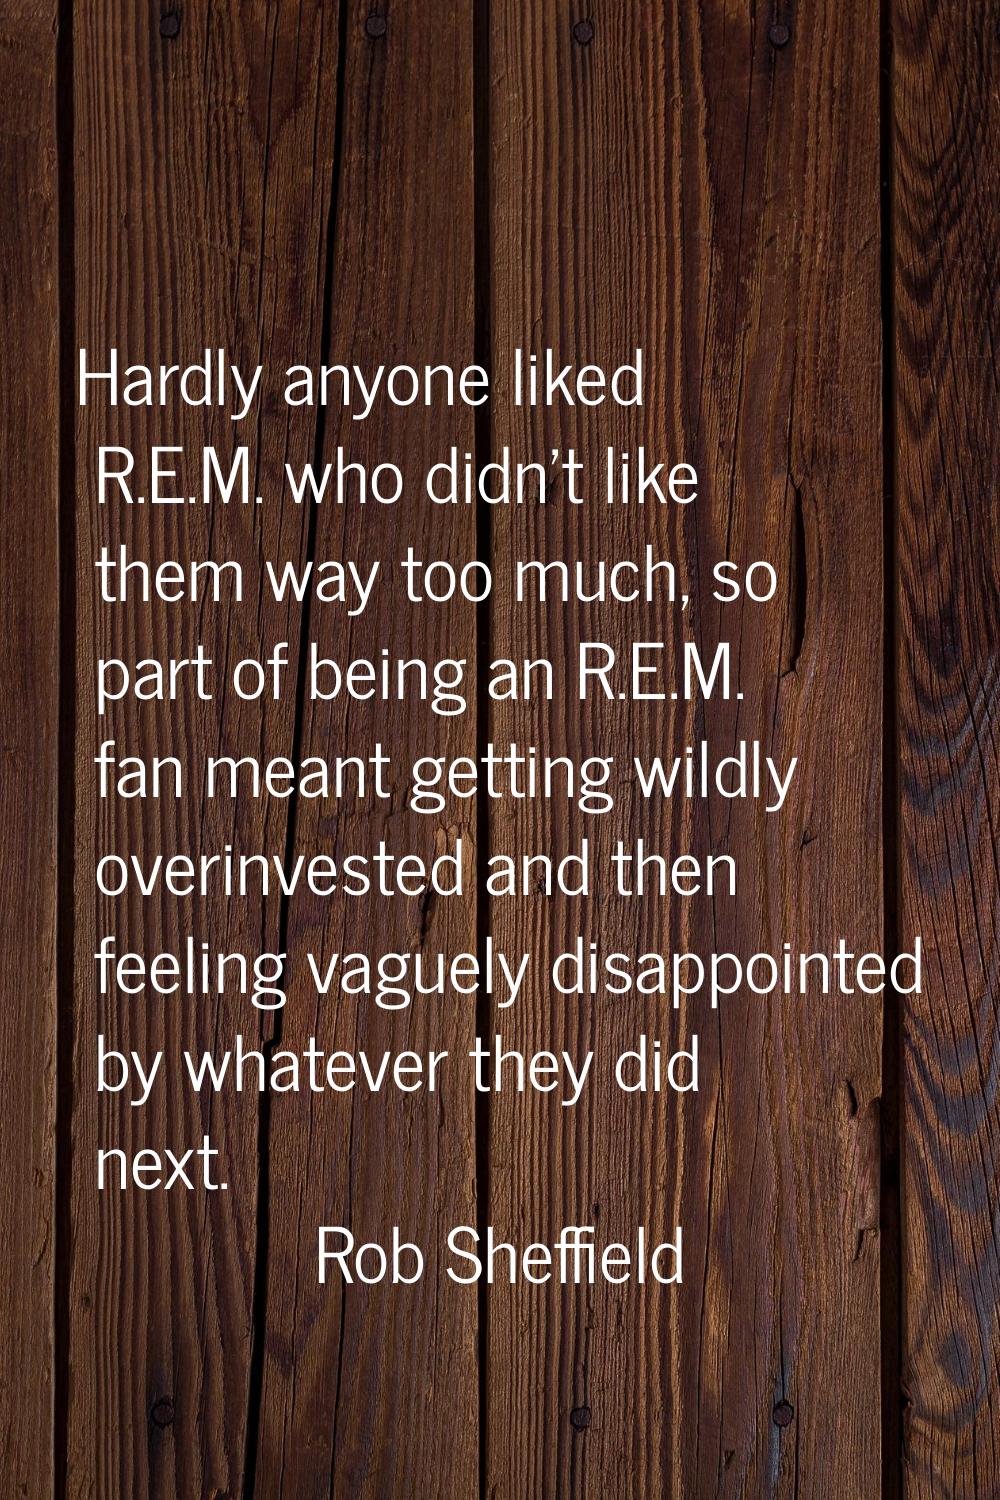 Hardly anyone liked R.E.M. who didn't like them way too much, so part of being an R.E.M. fan meant 